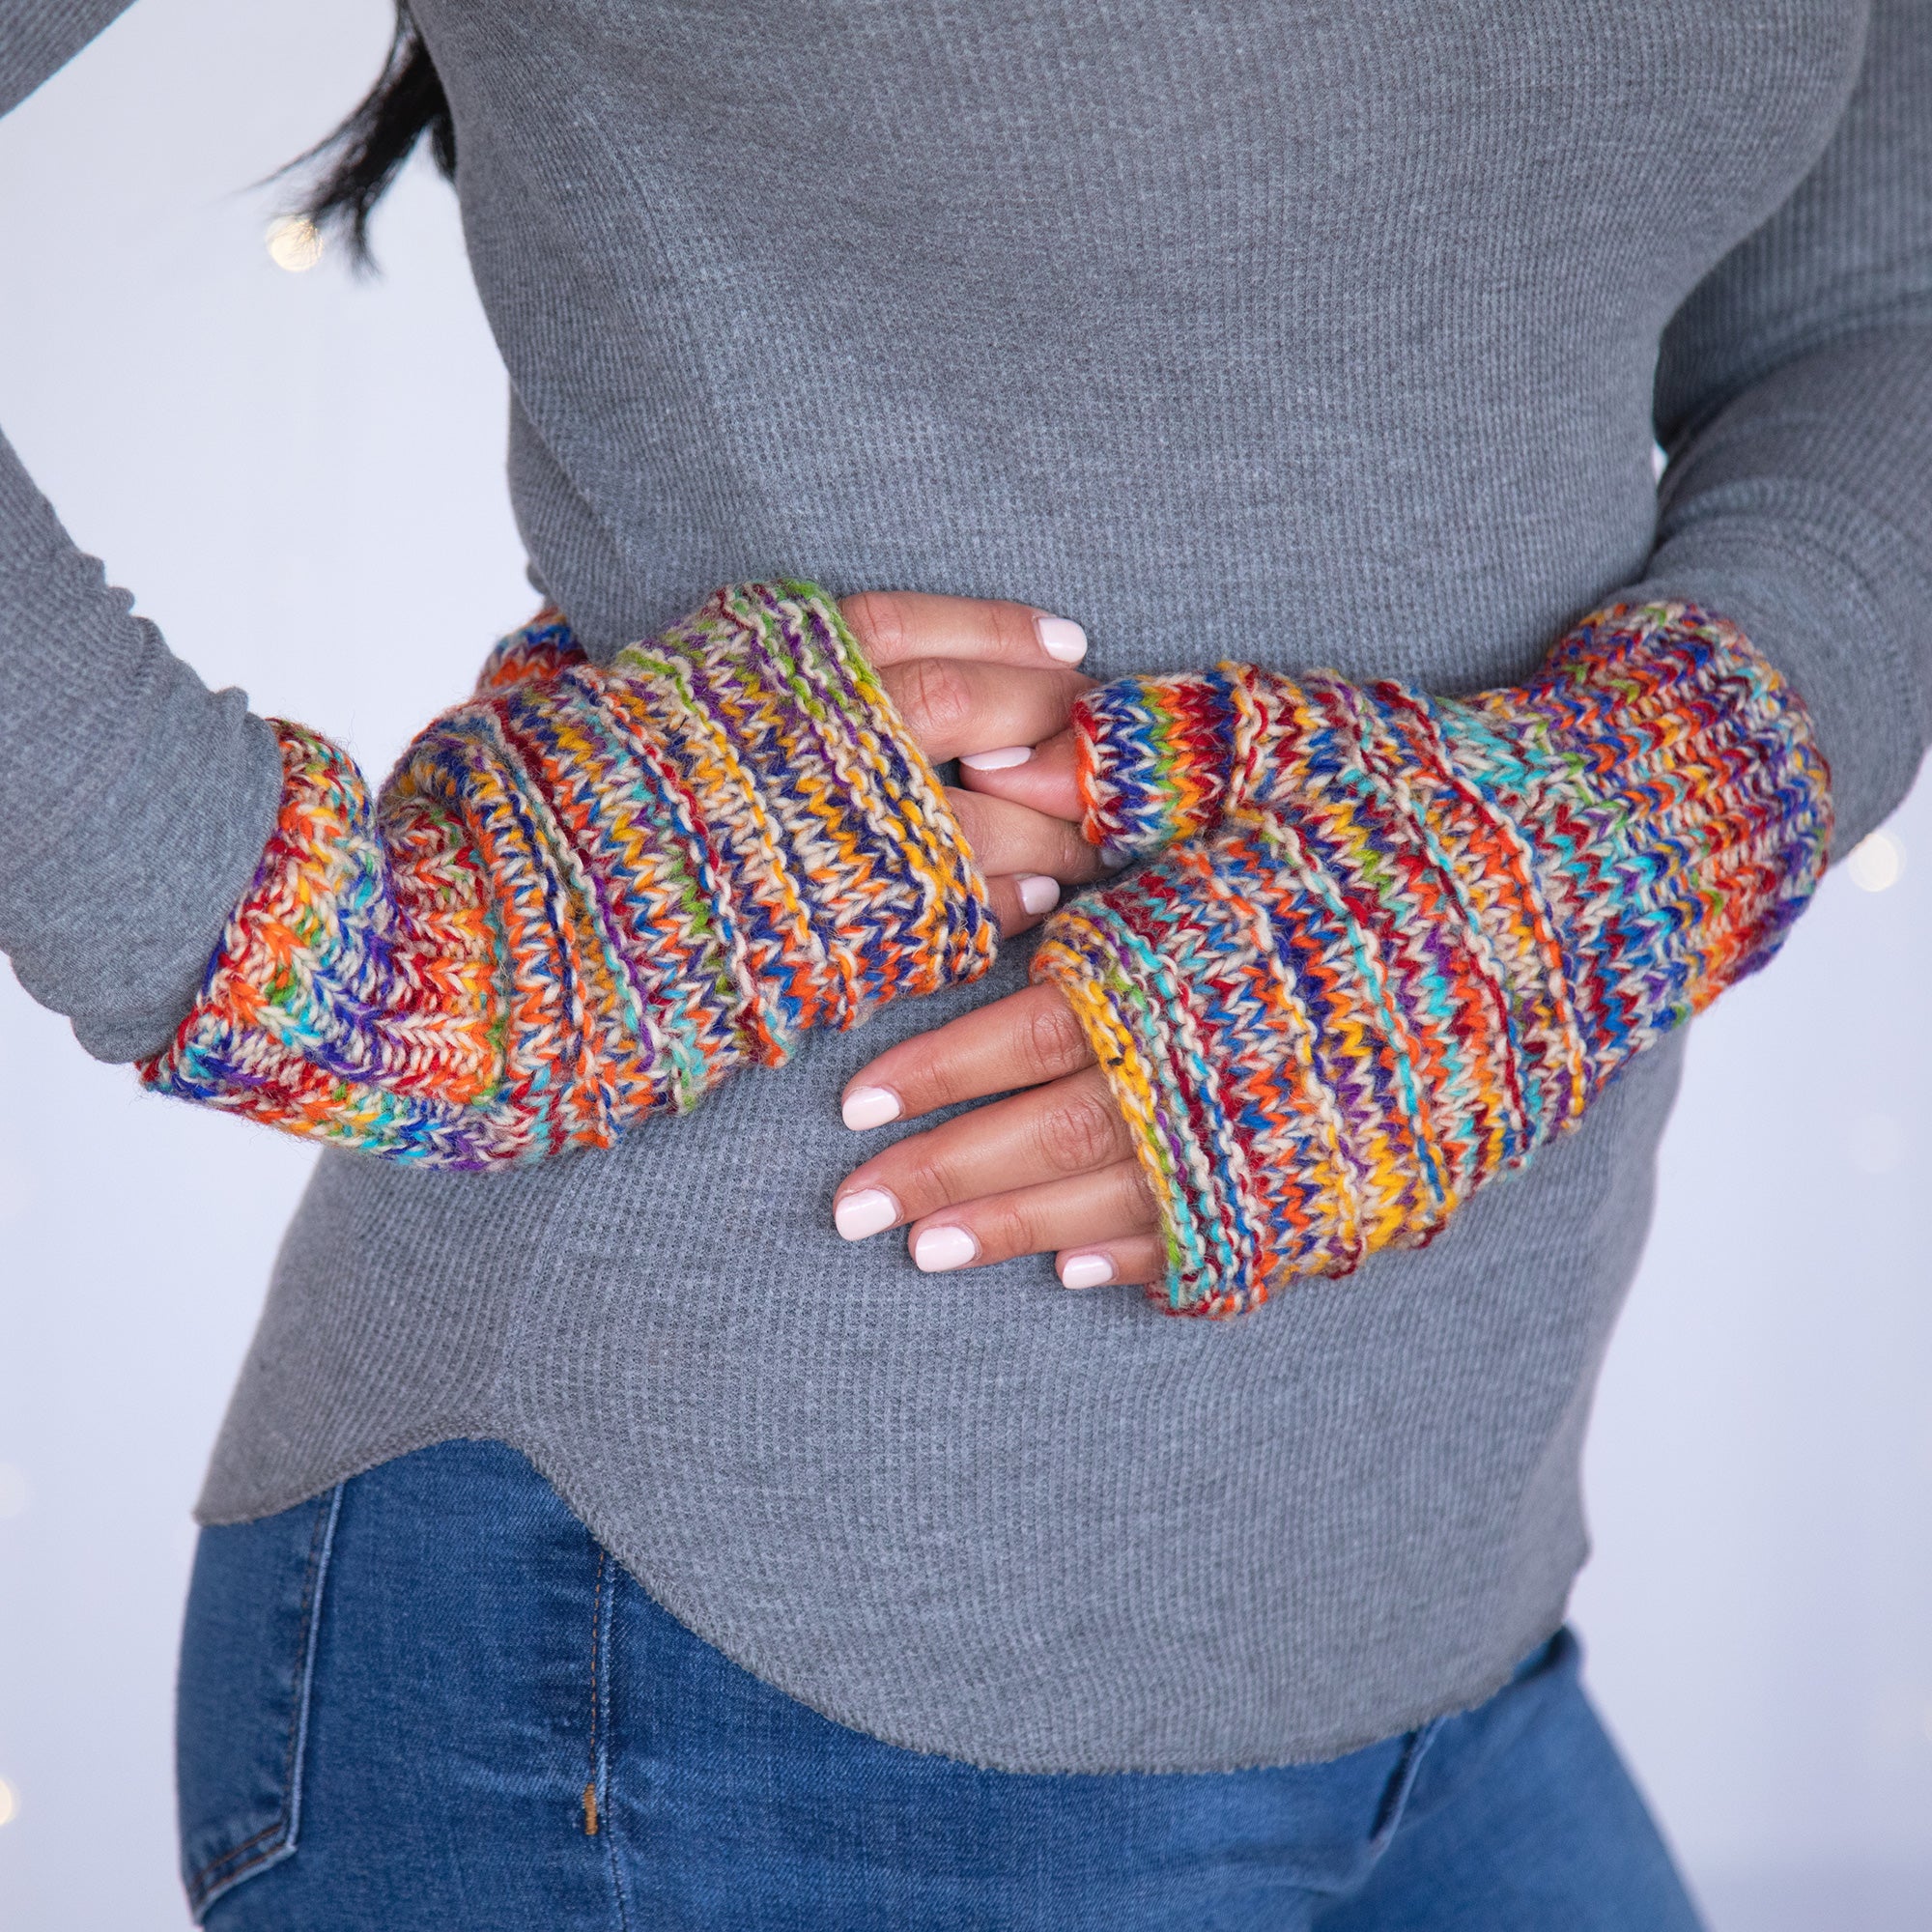 Space-Dye Hand Knit Wool Hand Warmers - Natural